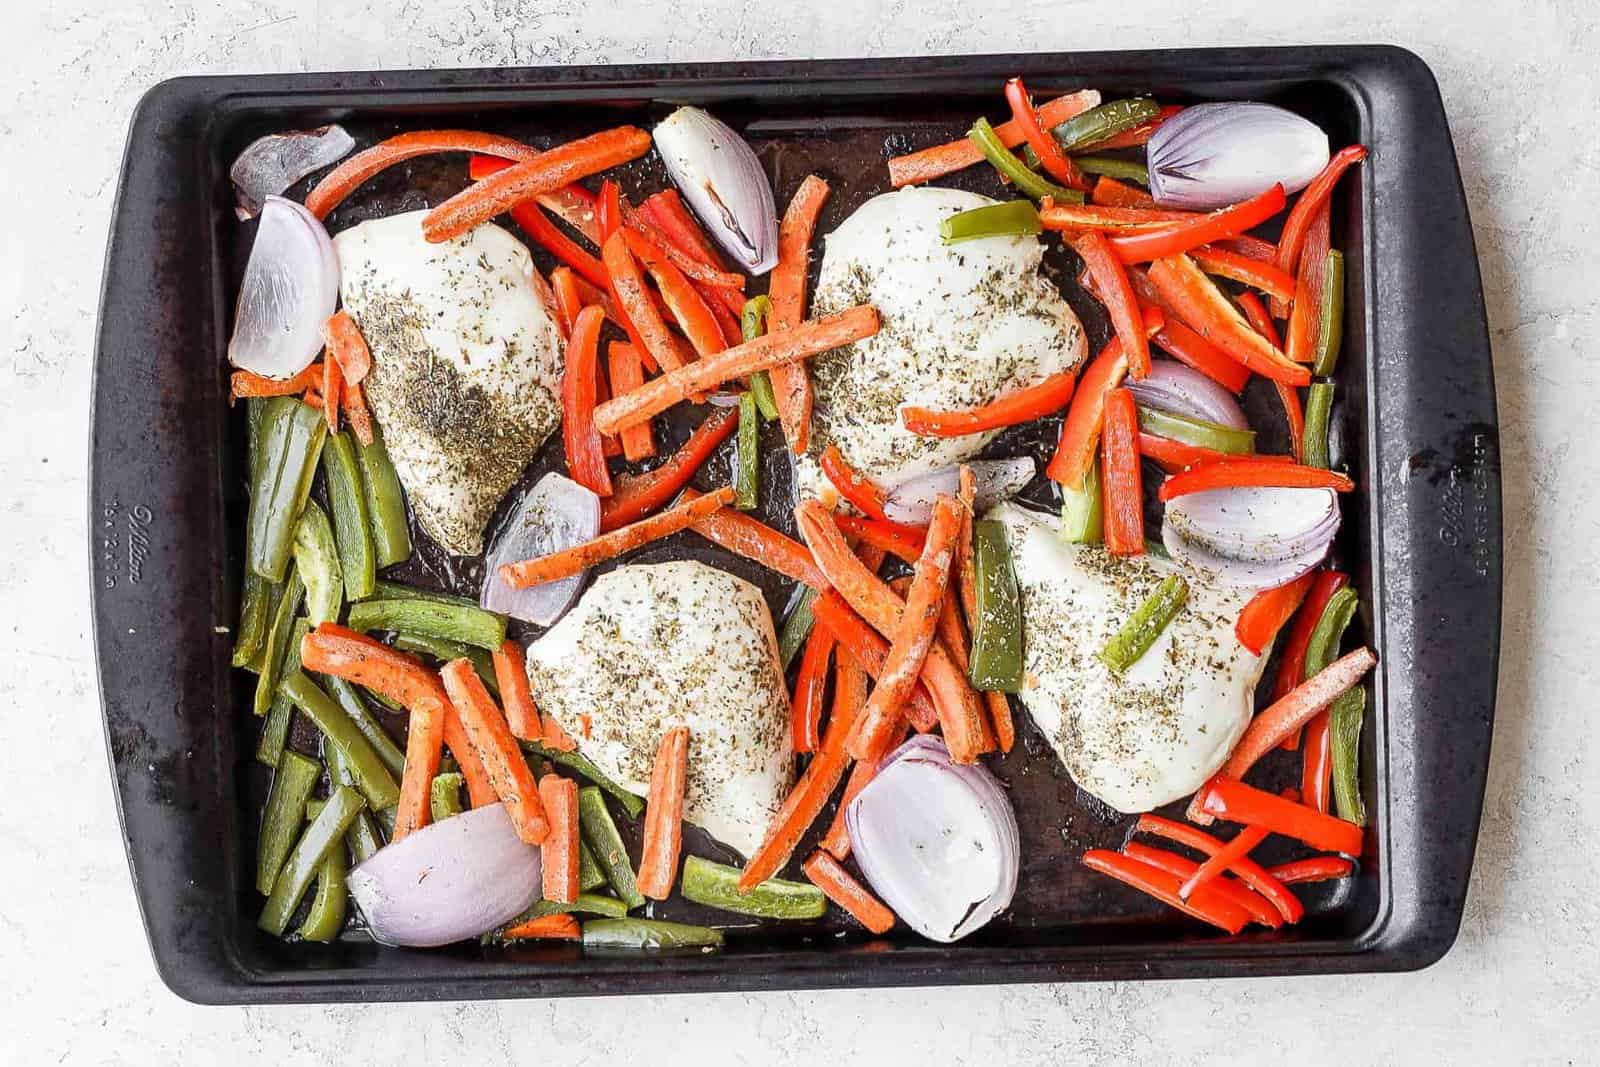 https://feelgoodfoodie.net/wp-content/uploads/2023/08/how-to-make-sheet-pan-meals-5-rotated.jpg